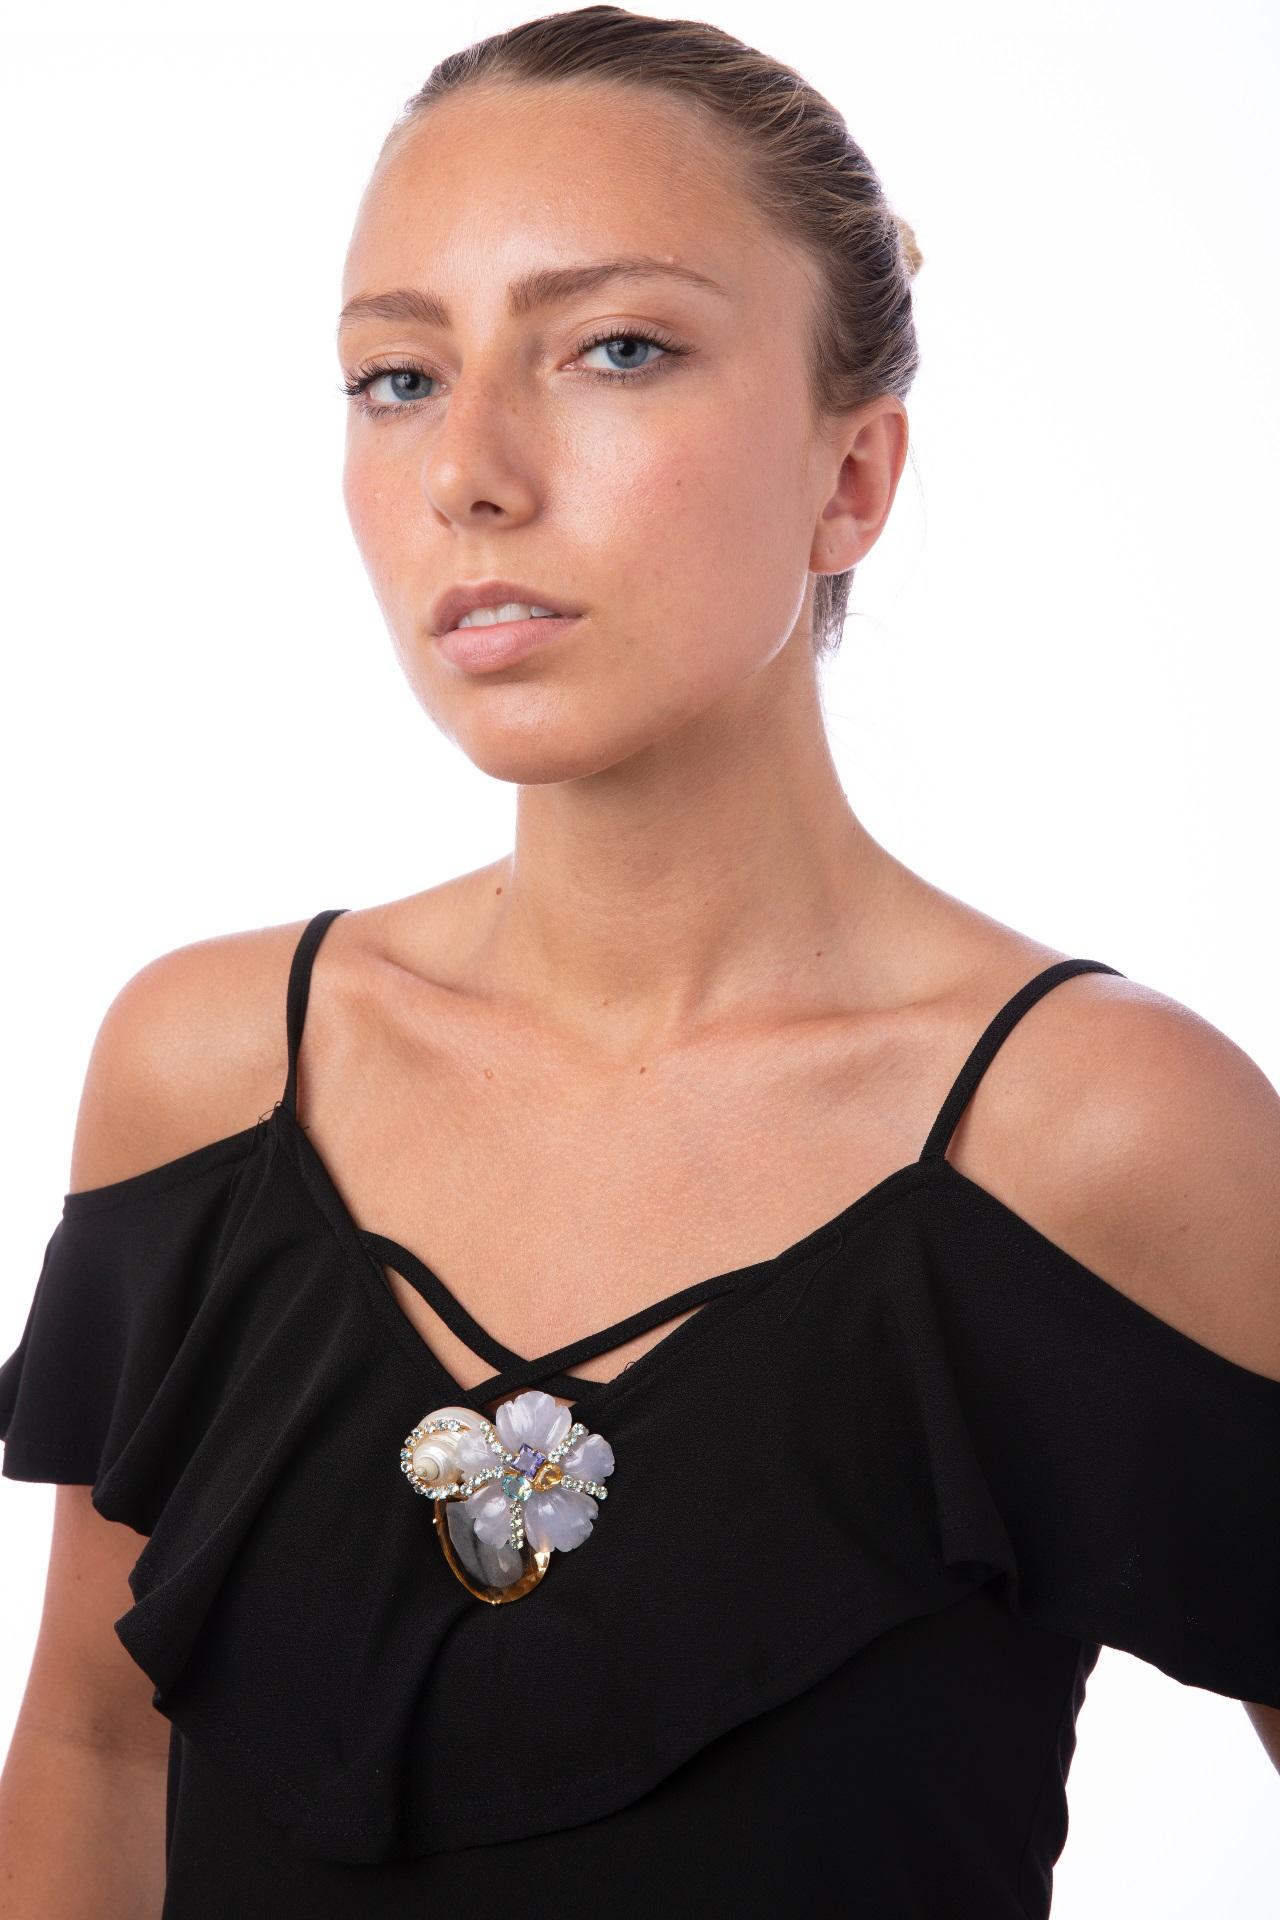 The Isabel Pin, crafted from semi-precious stones, boasts a beautiful flower design featuring contrasting shapes and colors, reminiscent of a summery and vintage aesthetic.

SKU: PN-CLT-9C
Stones: White Shell, faceted Lemon Quartz, Blue Quartz,